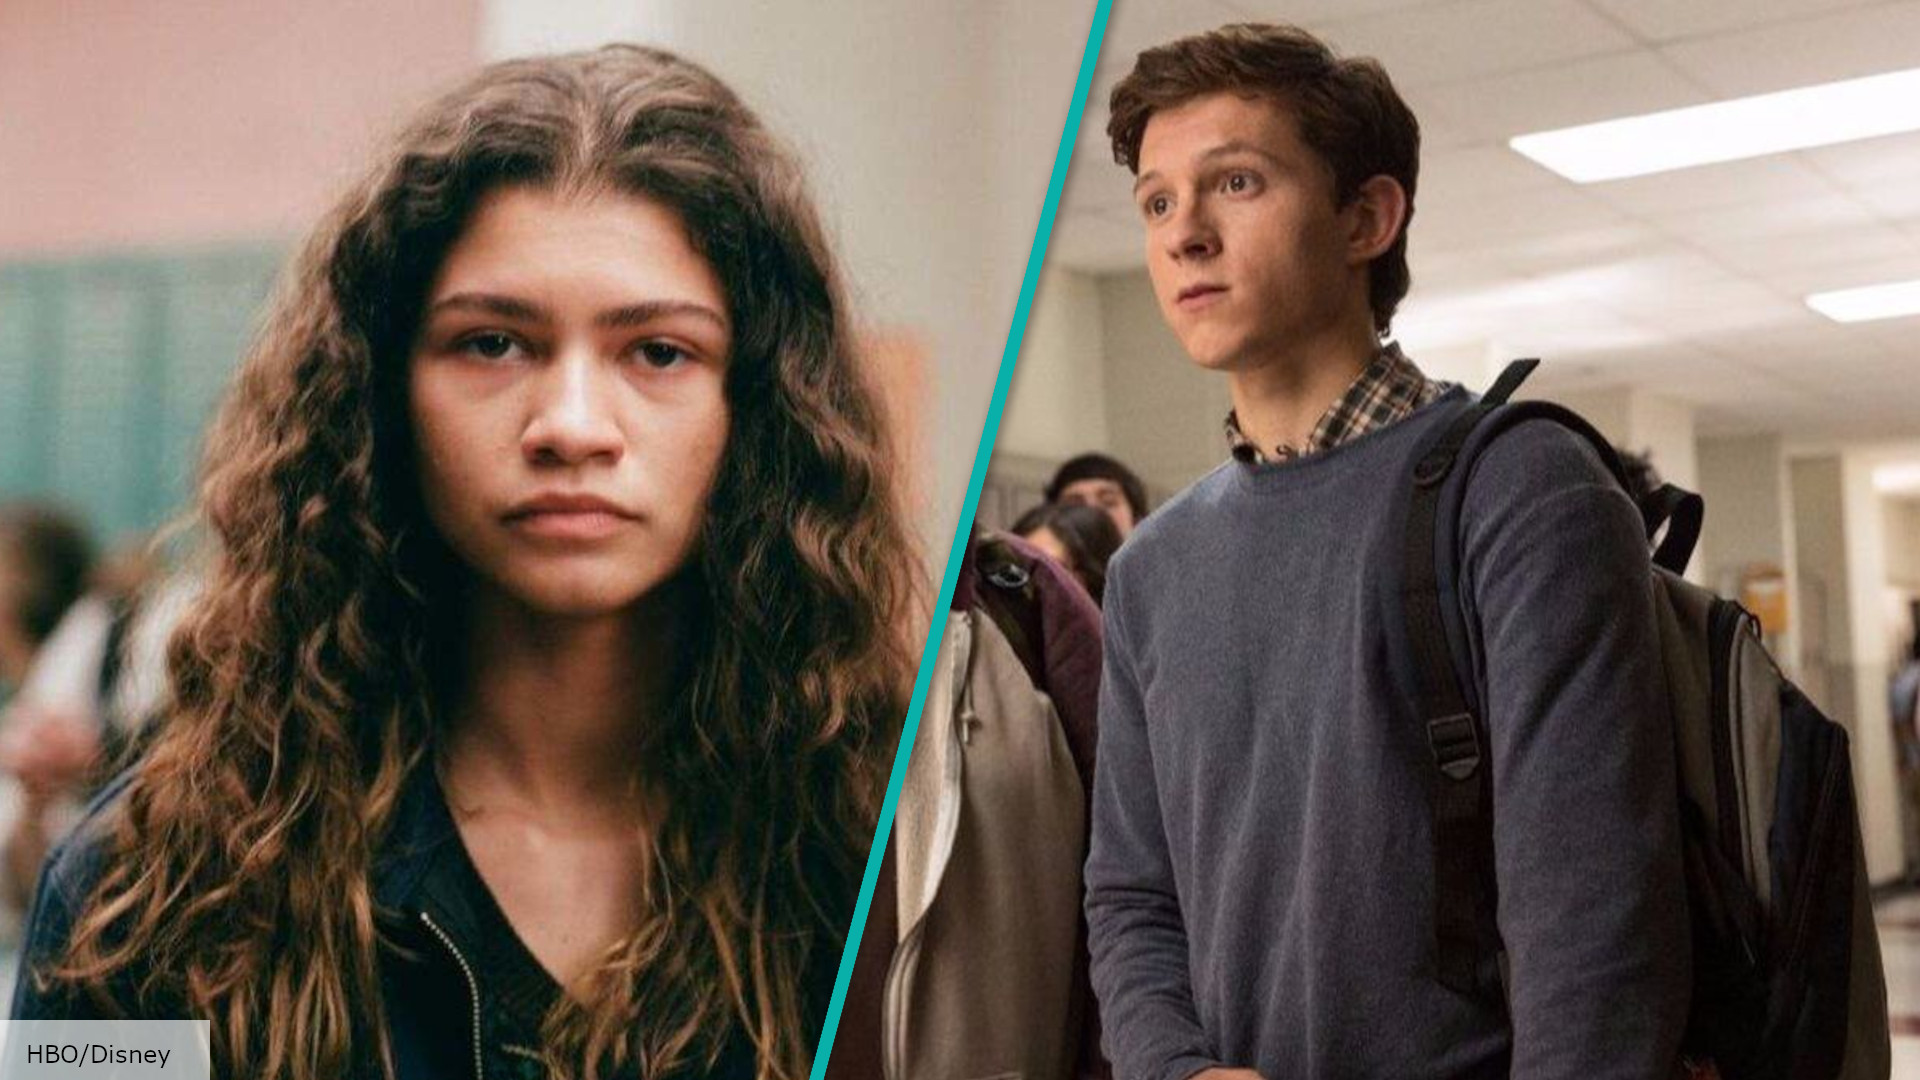 Tom Holland teases Euphoria cameo may have already happened